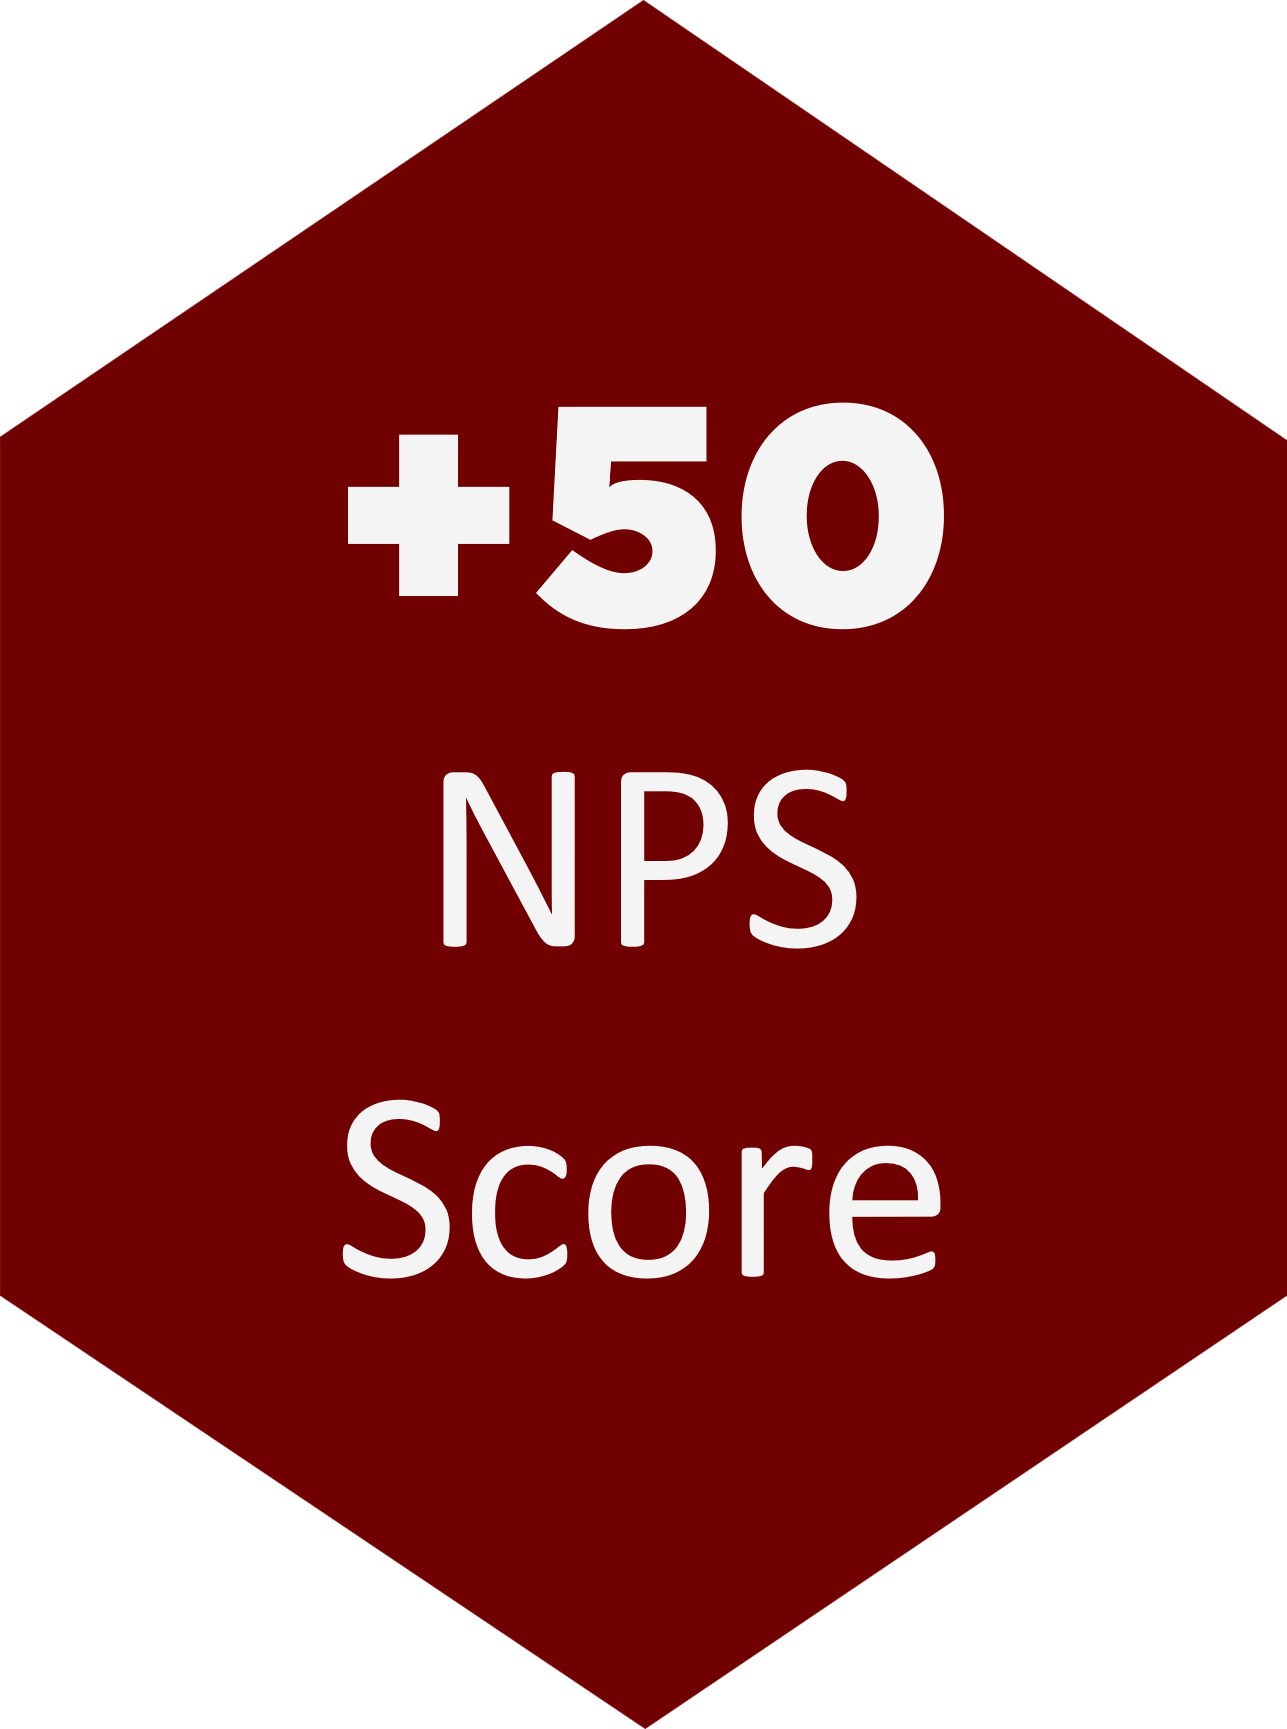 A dark red hexagon with '+50 NPS Score' within it in white text.